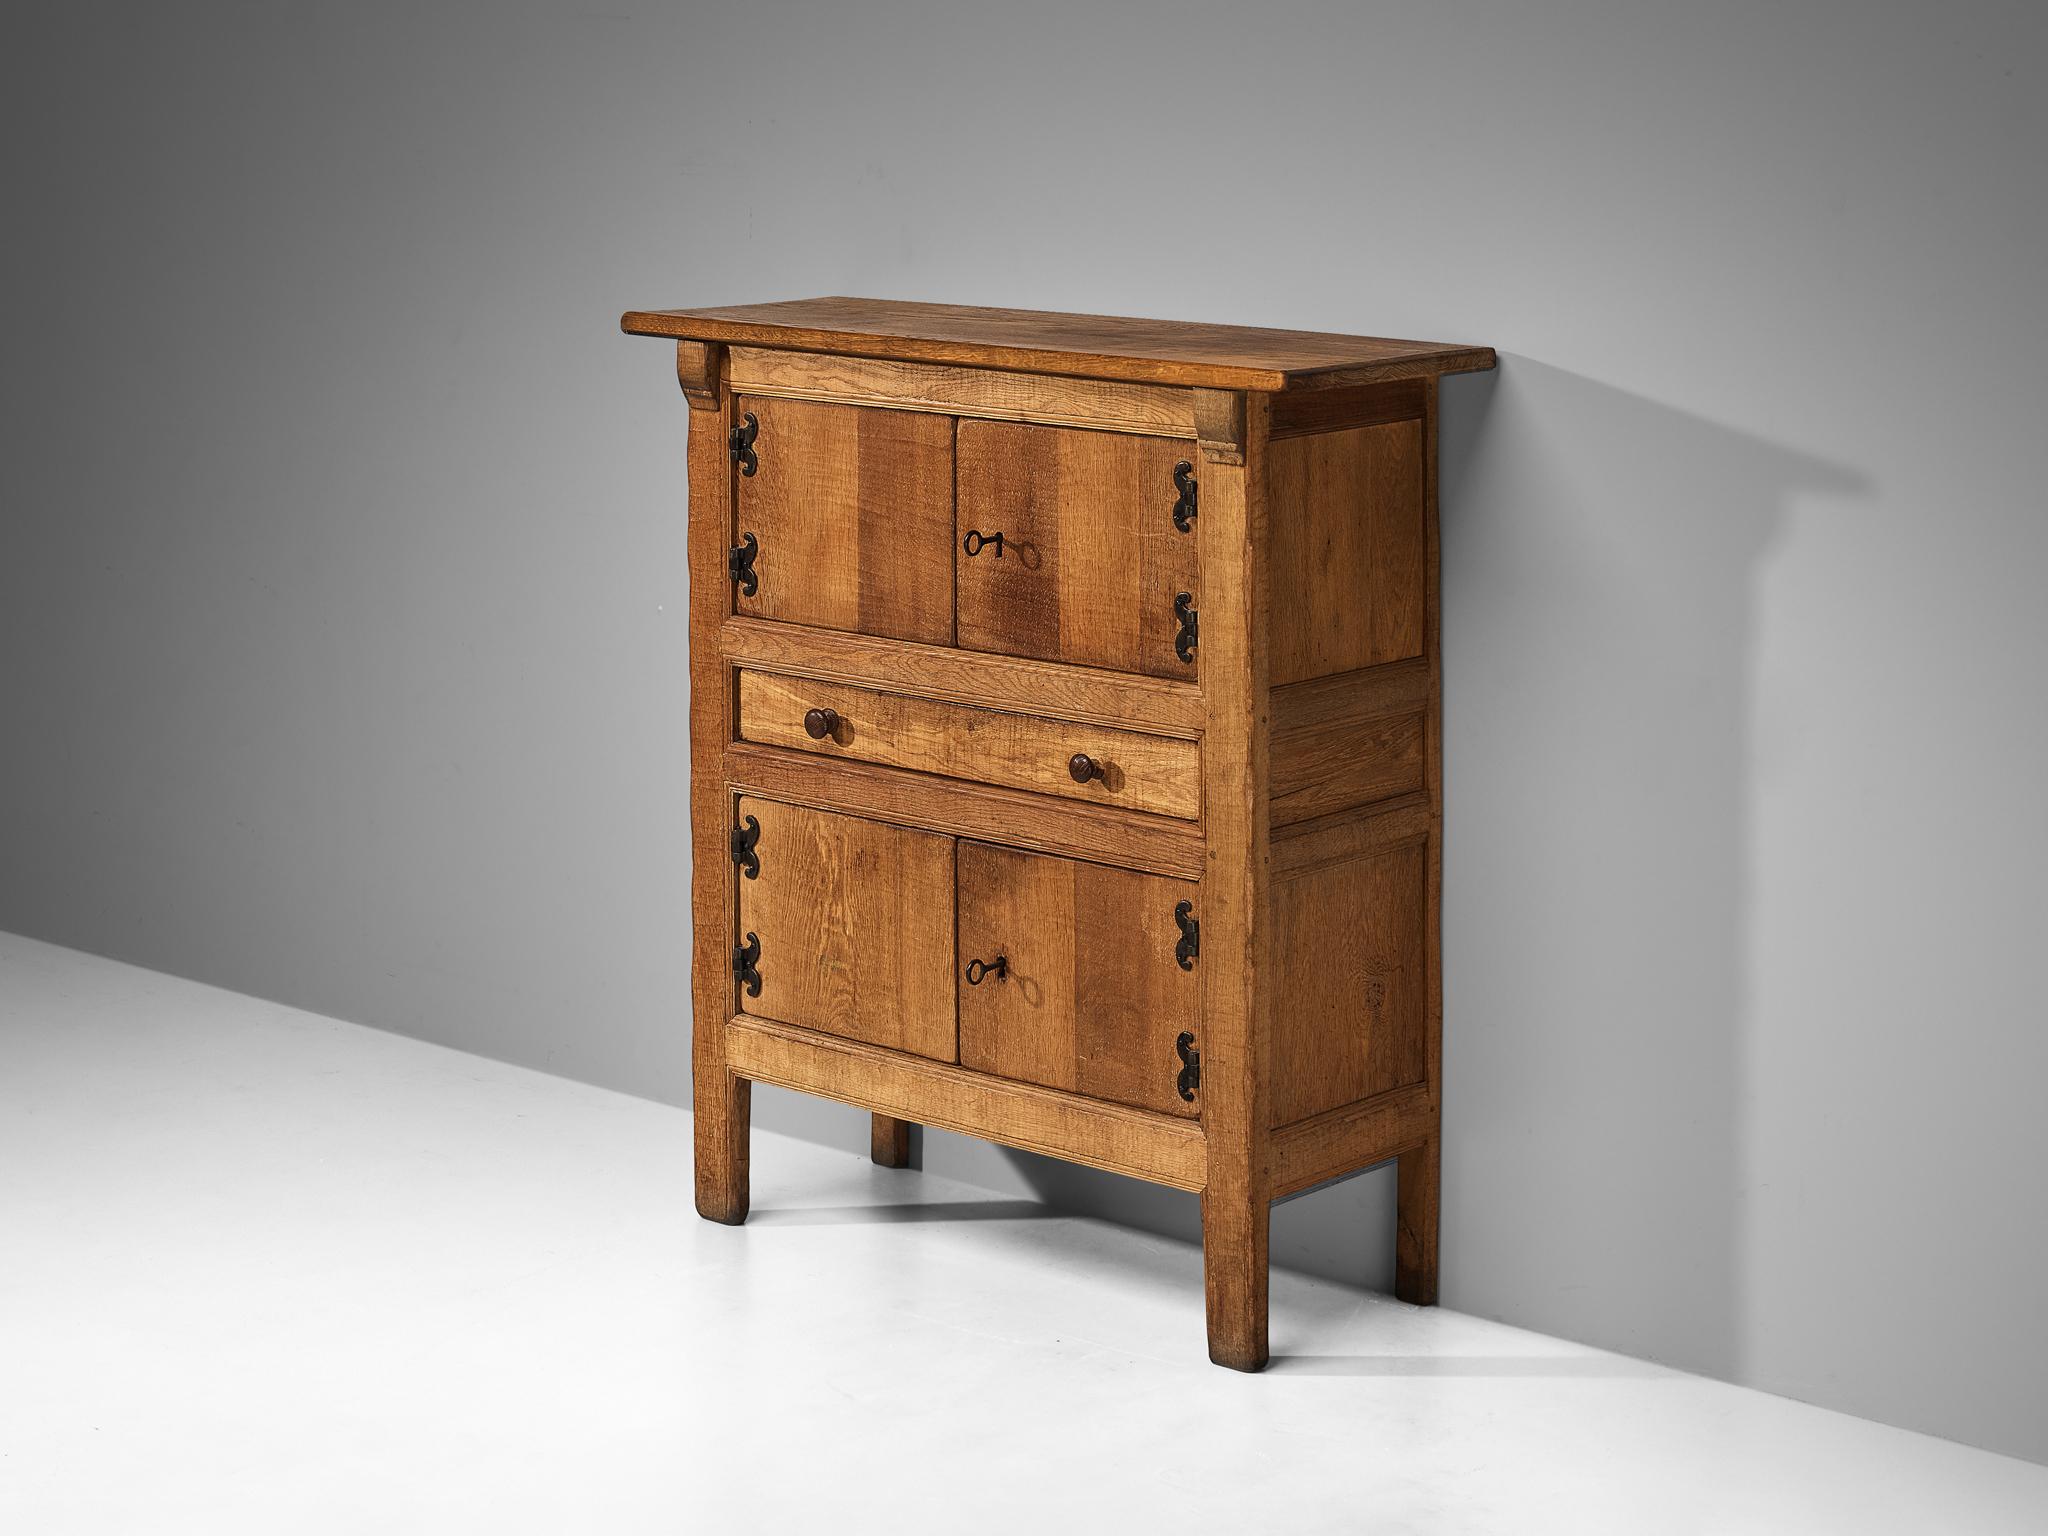 Highboard, oak, iron, France, 1960s

This sideboard is made in France around the 1960s and beautifully reflects the stylistic traits of Brutalism. A solid construction executed in solid oak where clear lines and sturdy shapes are allowed to emerge